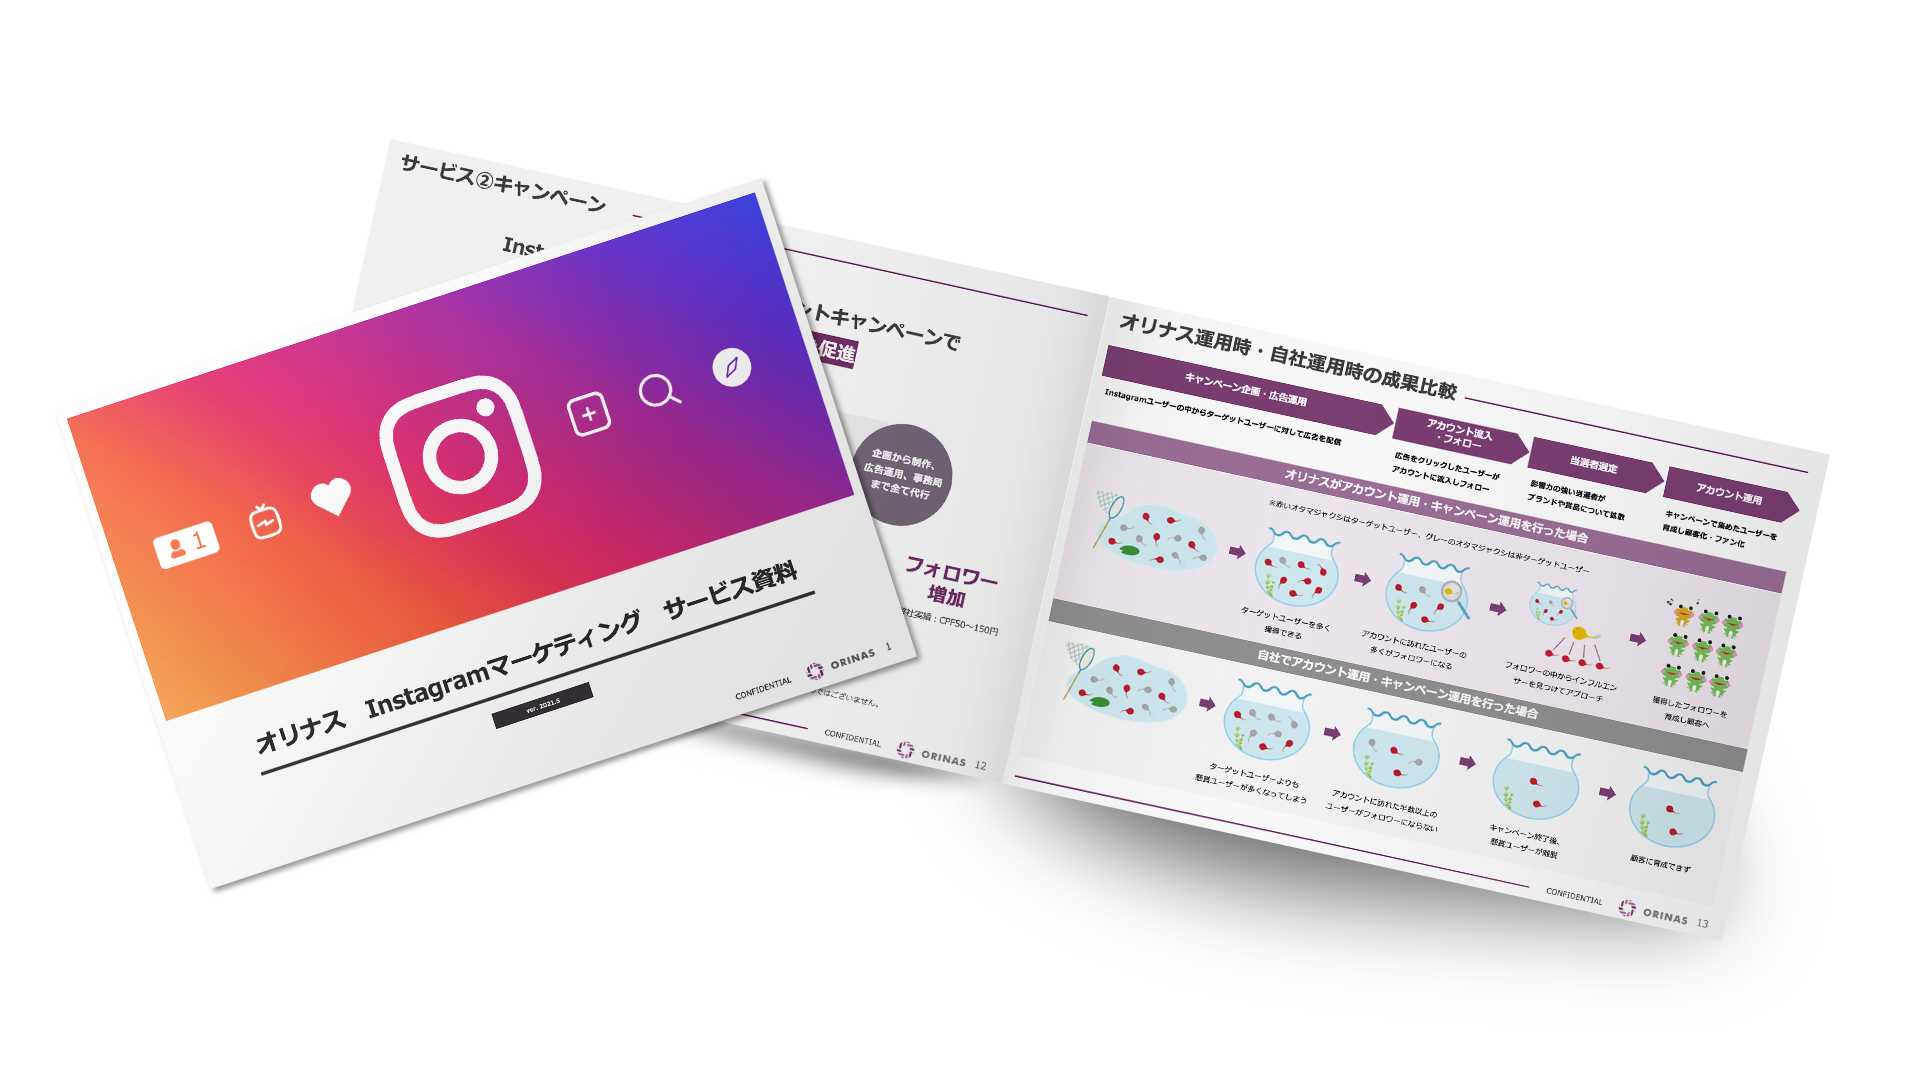 Instagramマーケティングサービス資料